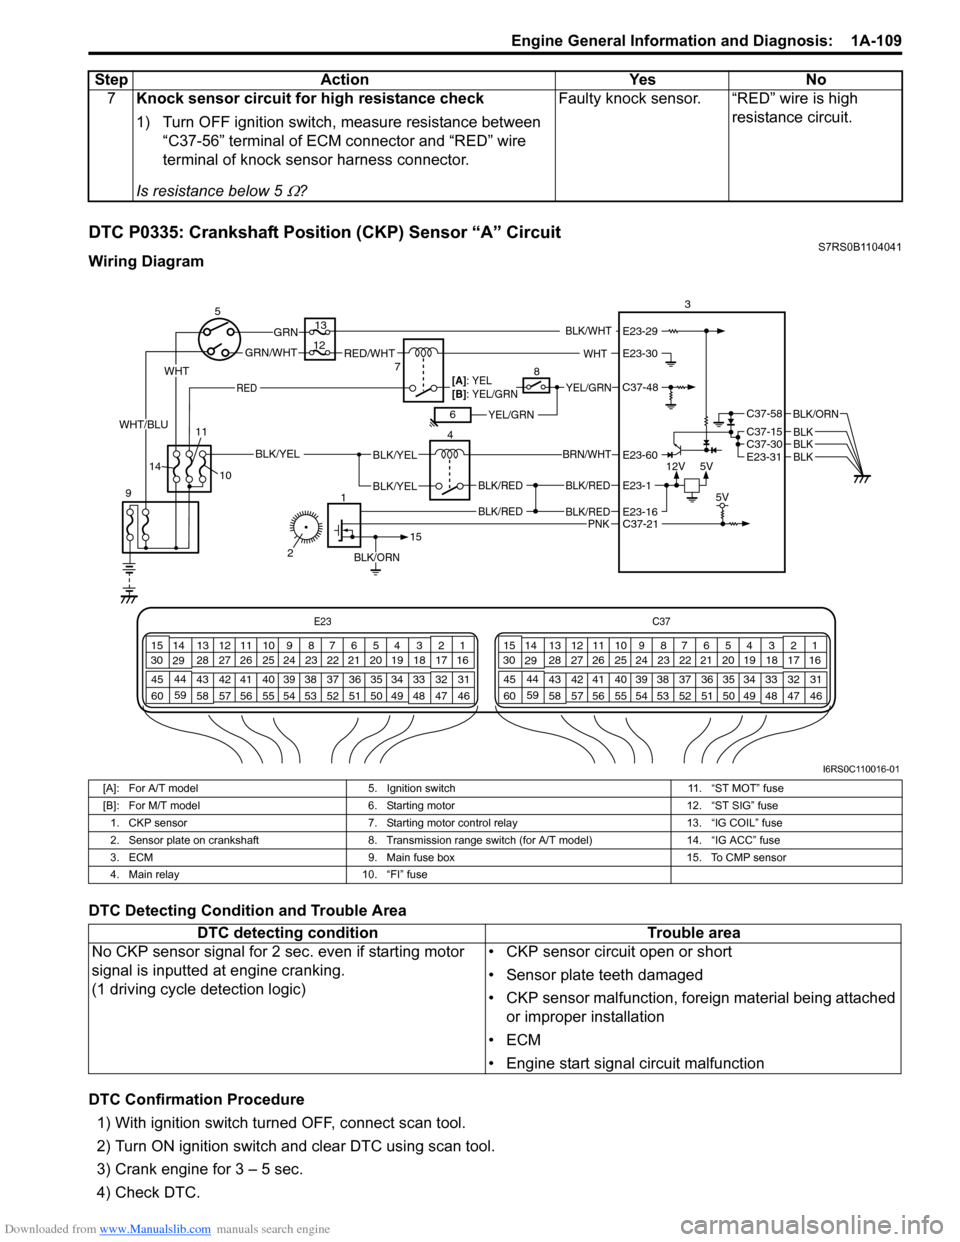 SUZUKI SWIFT 2006 2.G Service Workshop Manual Downloaded from www.Manualslib.com manuals search engine Engine General Information and Diagnosis:  1A-109
DTC P0335: Crankshaft Position (CKP) Sensor “A” CircuitS7RS0B1104041
Wiring Diagram
DTC D